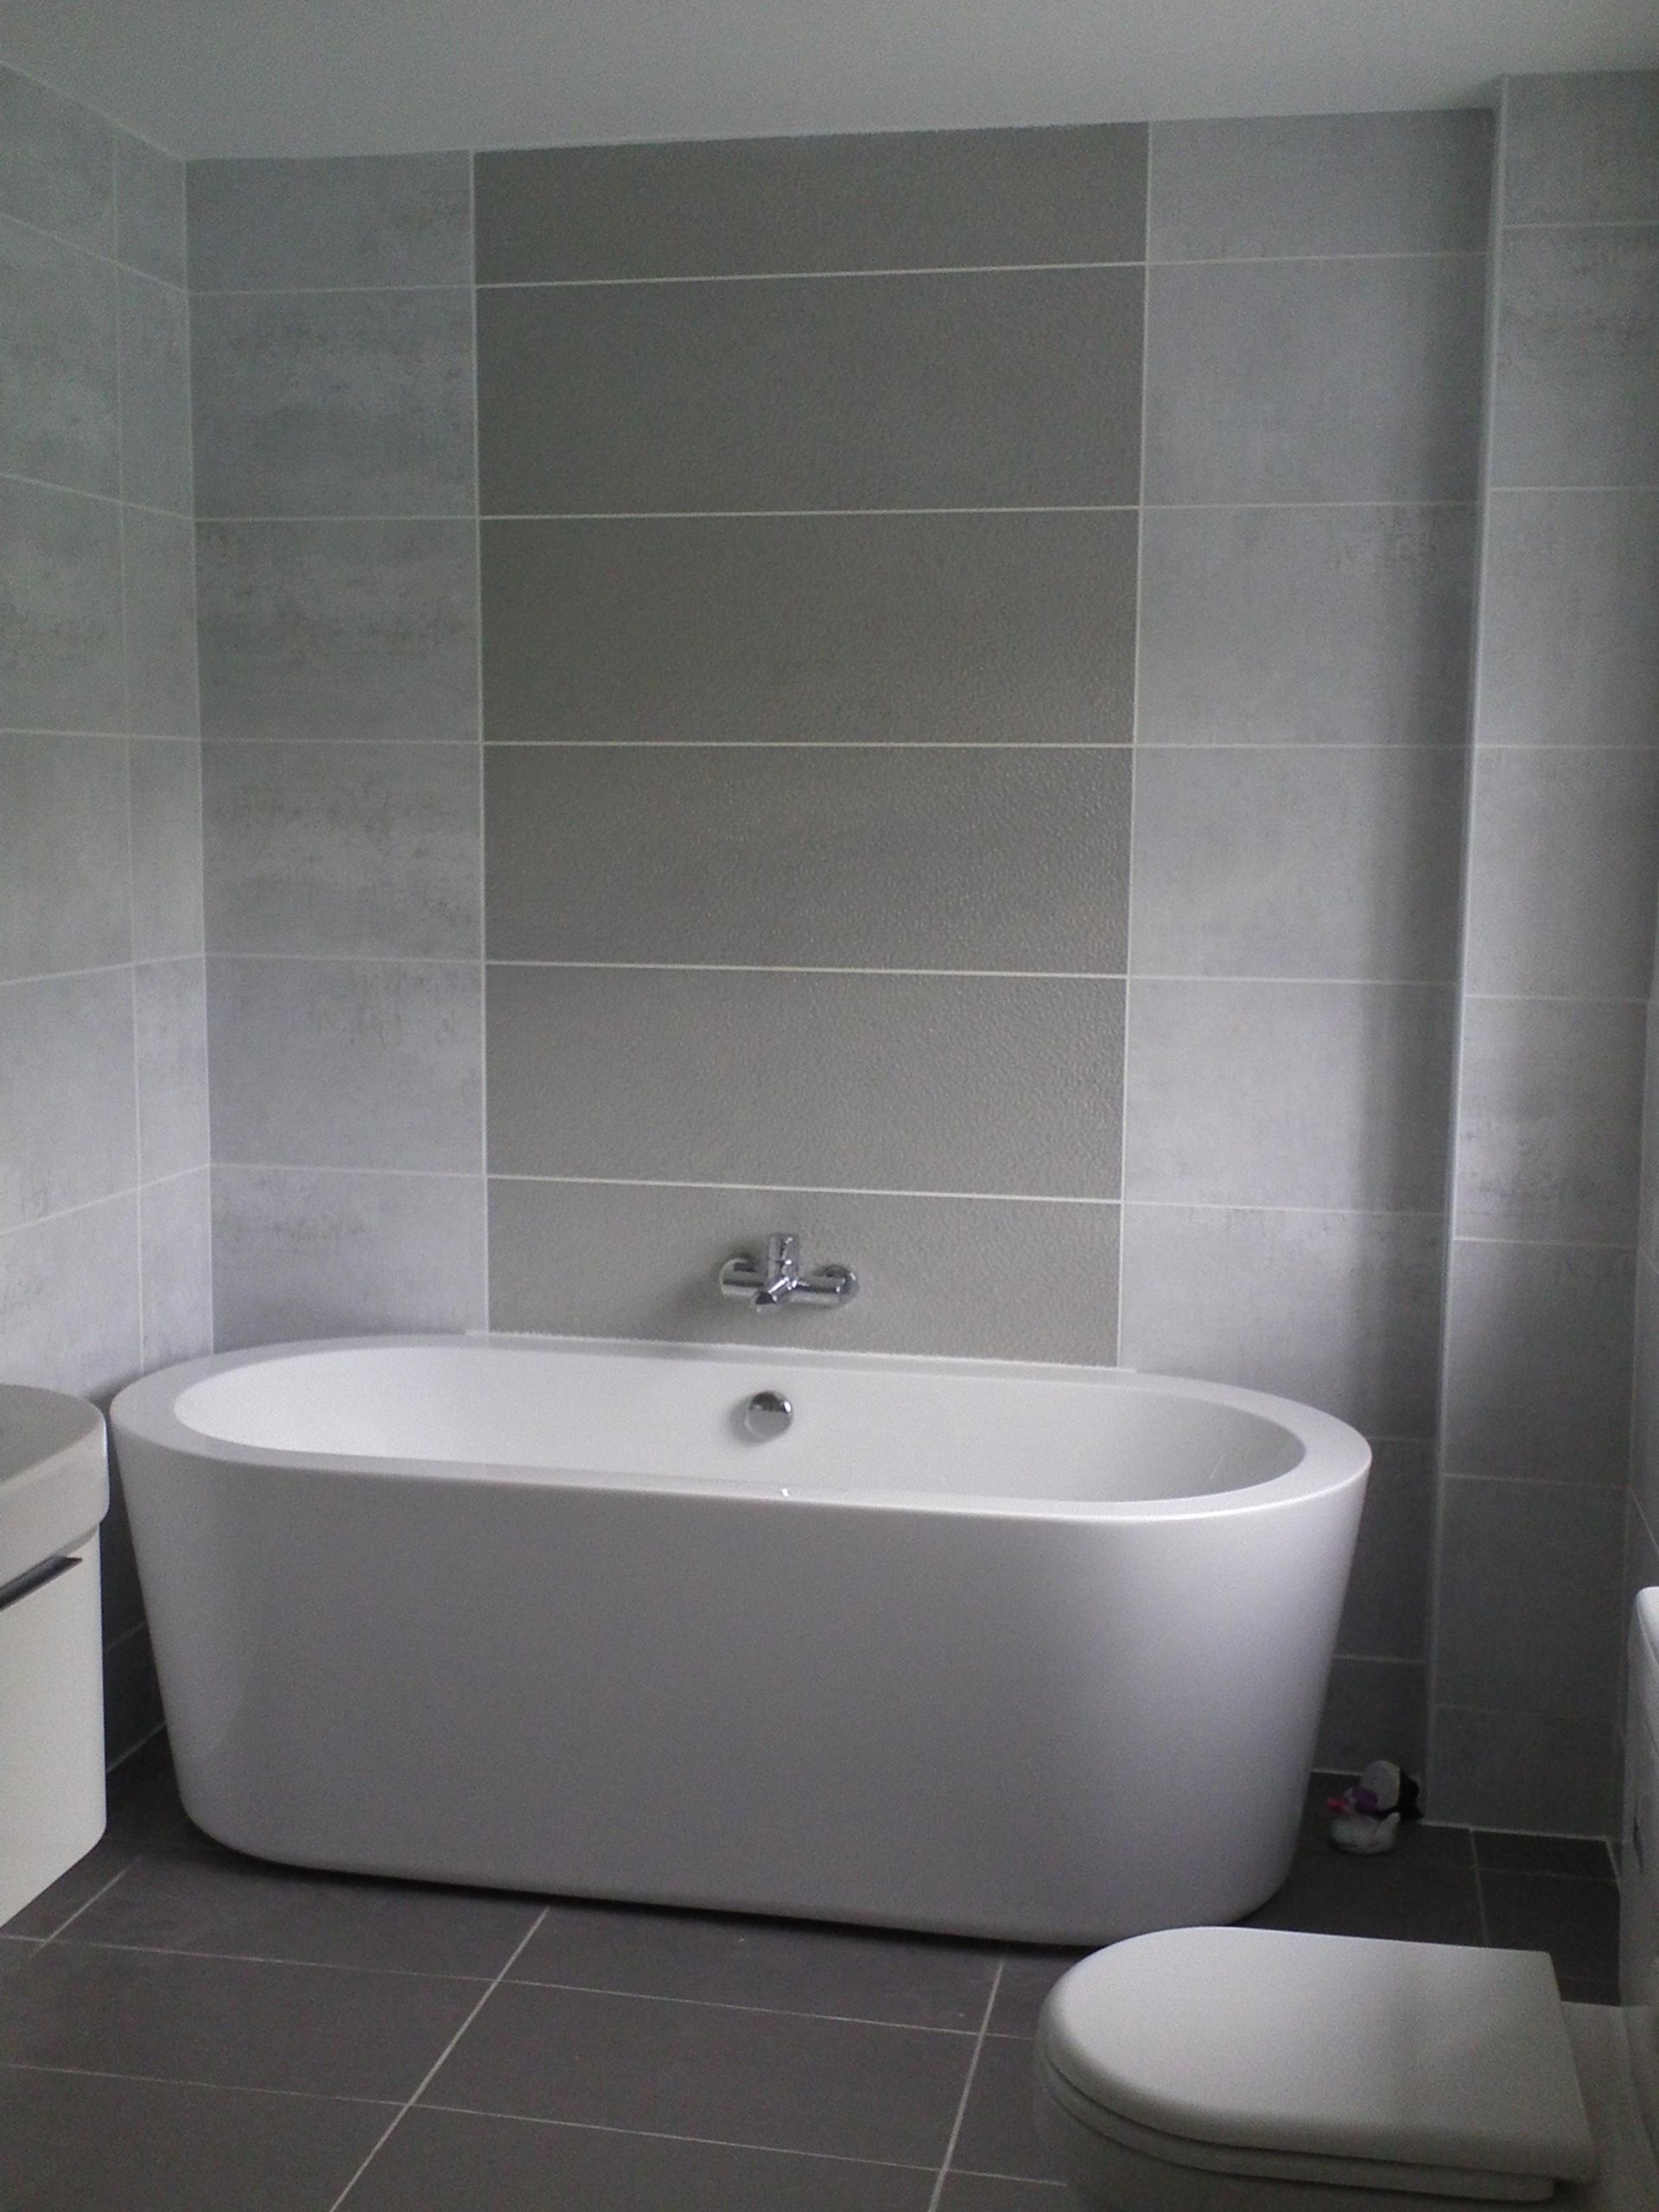 Gray Bathroom Wall Tile
 25 grey wall tiles for bathroom ideas and pictures